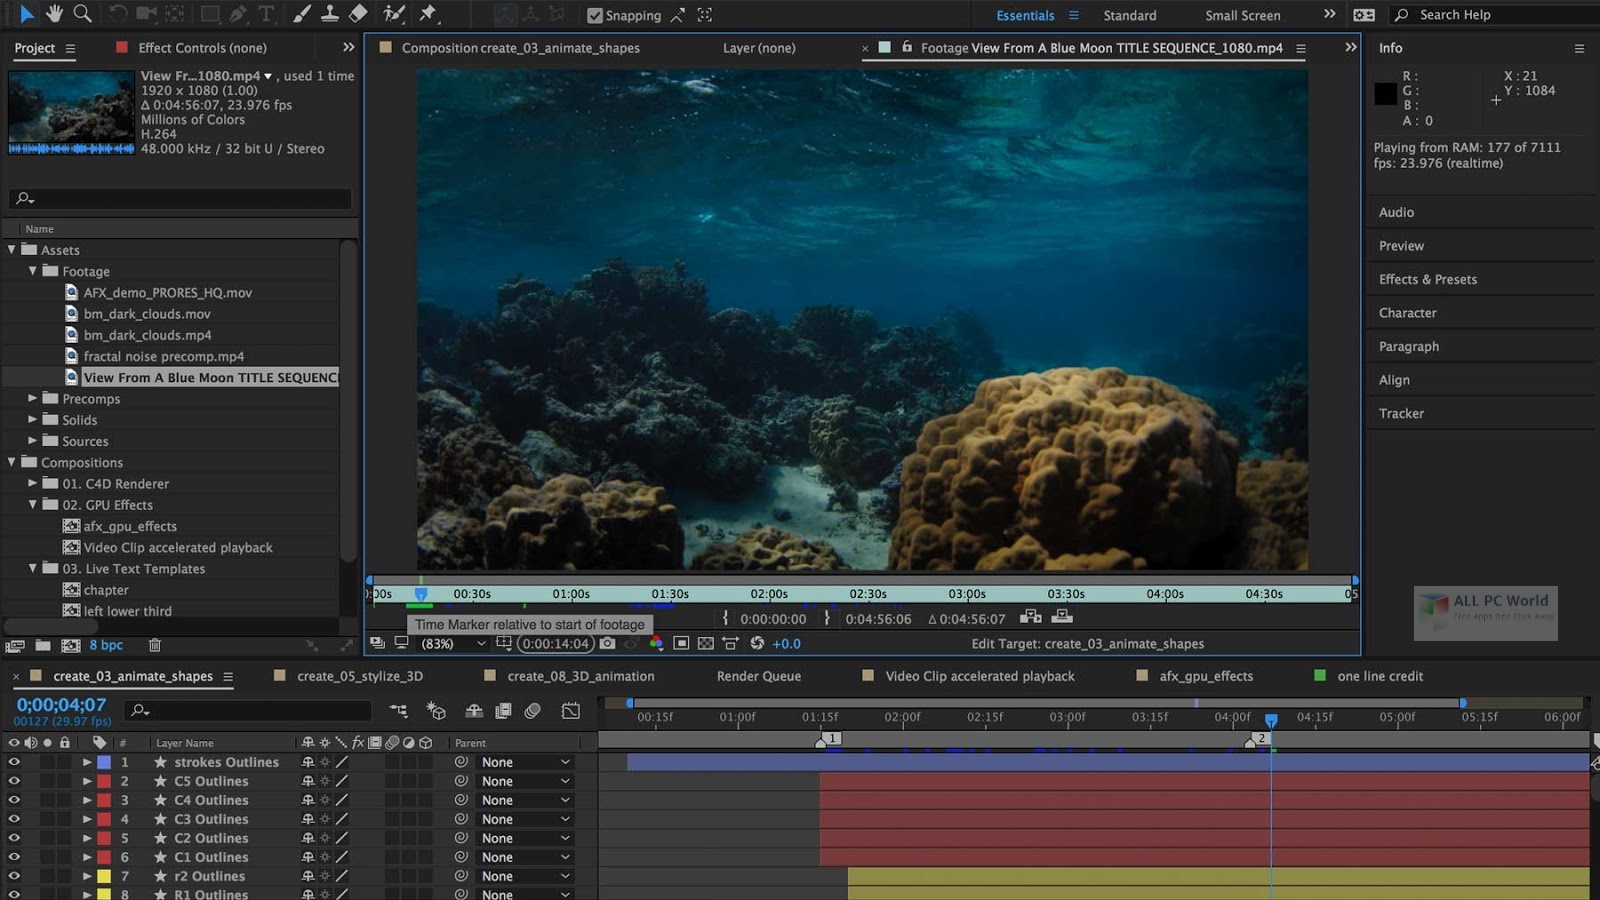 Adobe After Effects CC 2020 v17.0.6.35